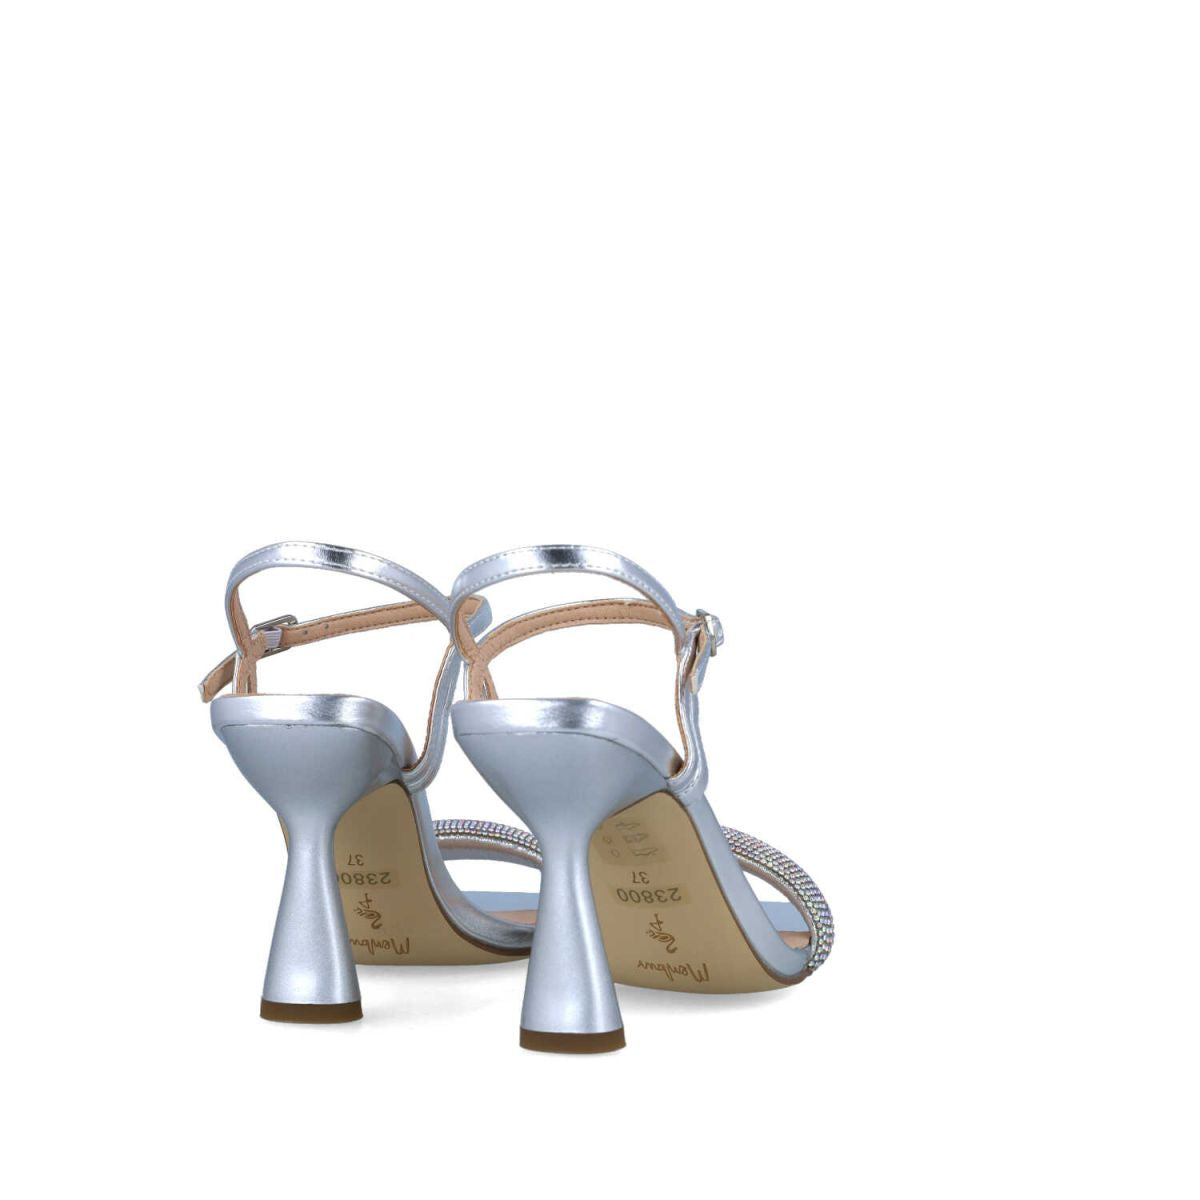 Fashion-Forward Silver Reflective Sandals for Occasions